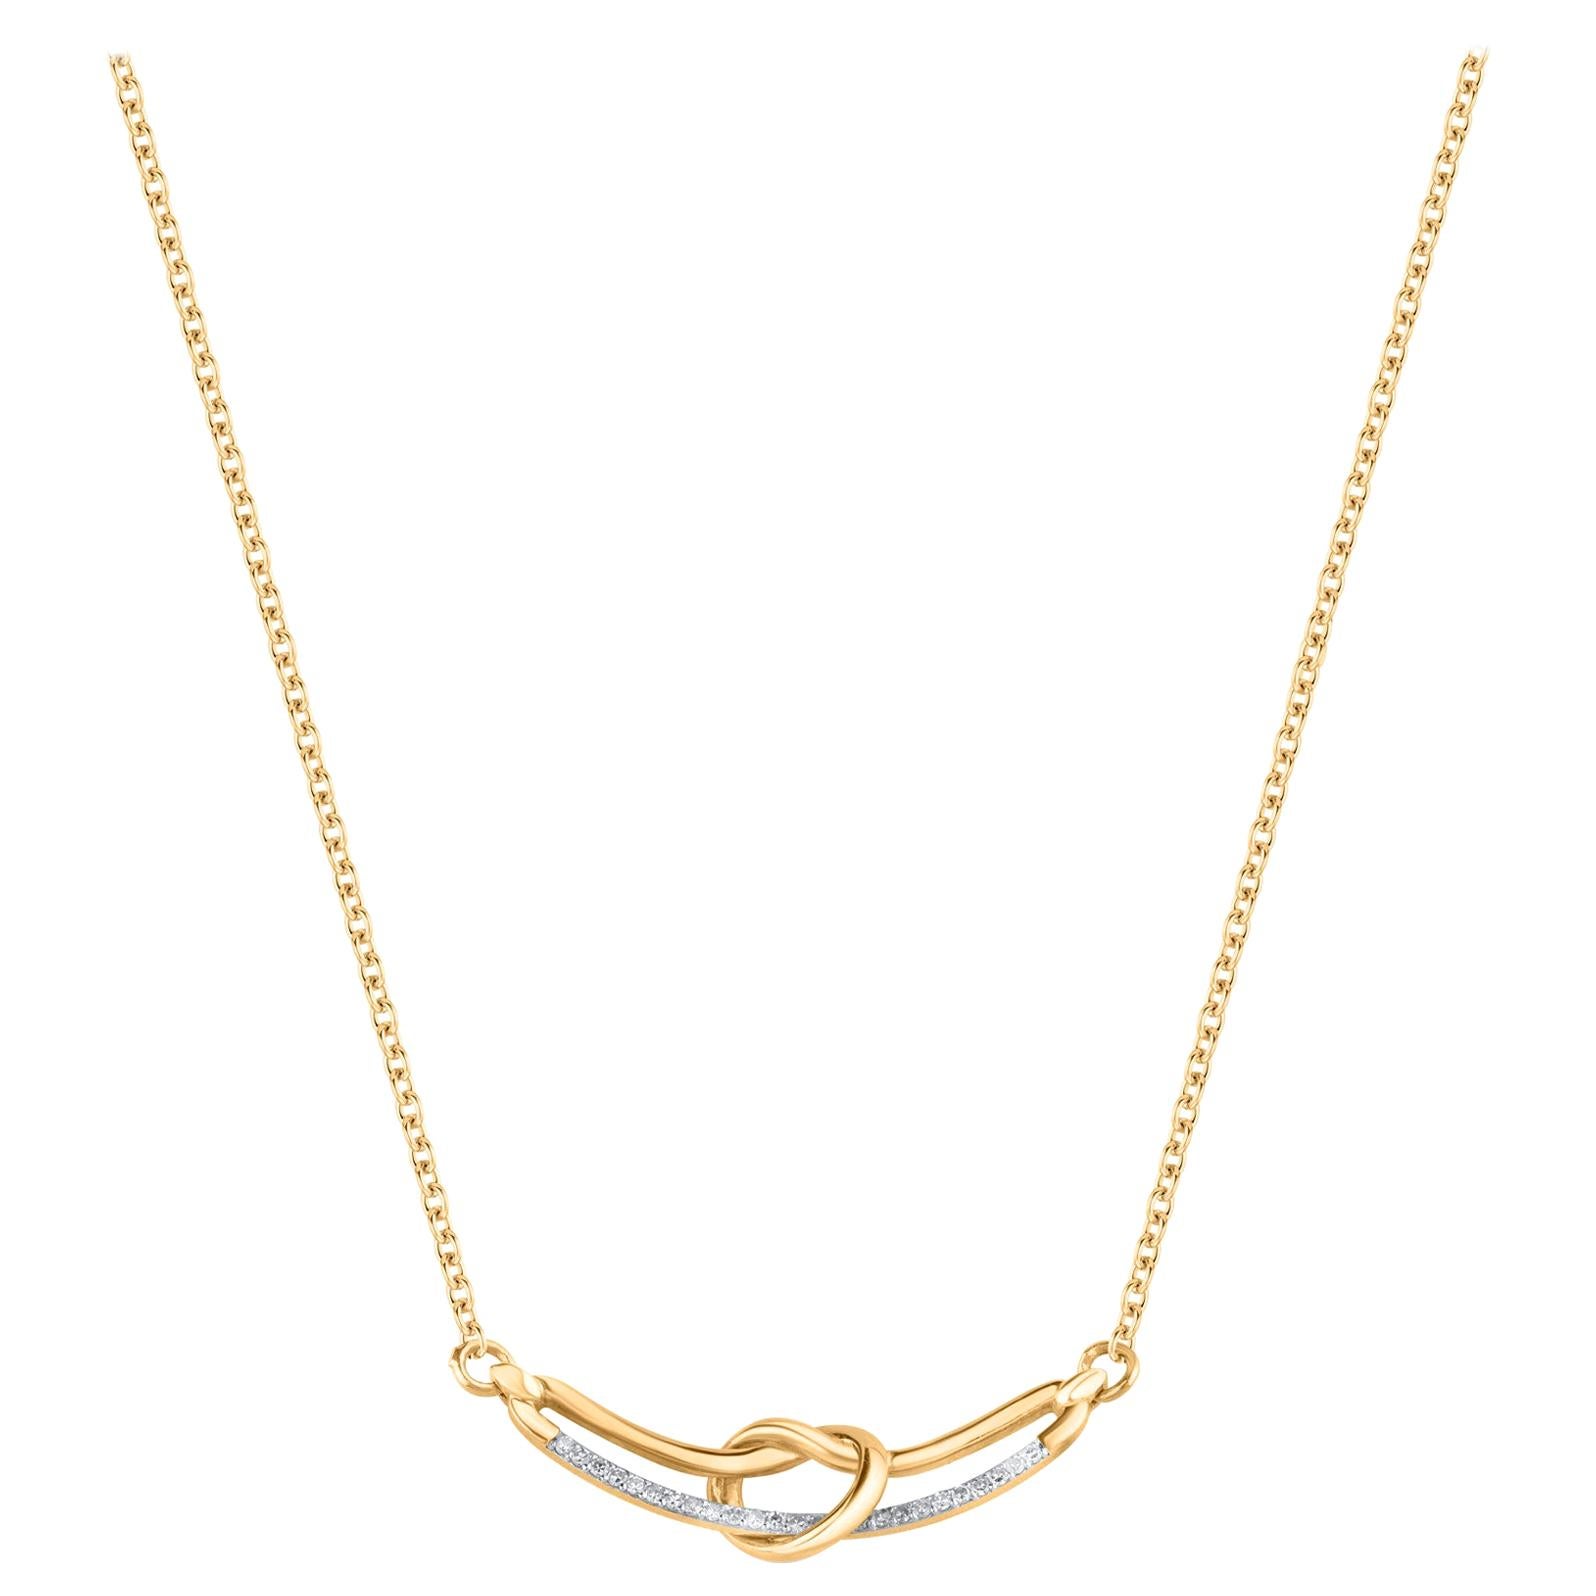 TJD 0.15 Carat Diamond 18Karat Yellow Gold Love Knot Necklace with 18 inch Chain